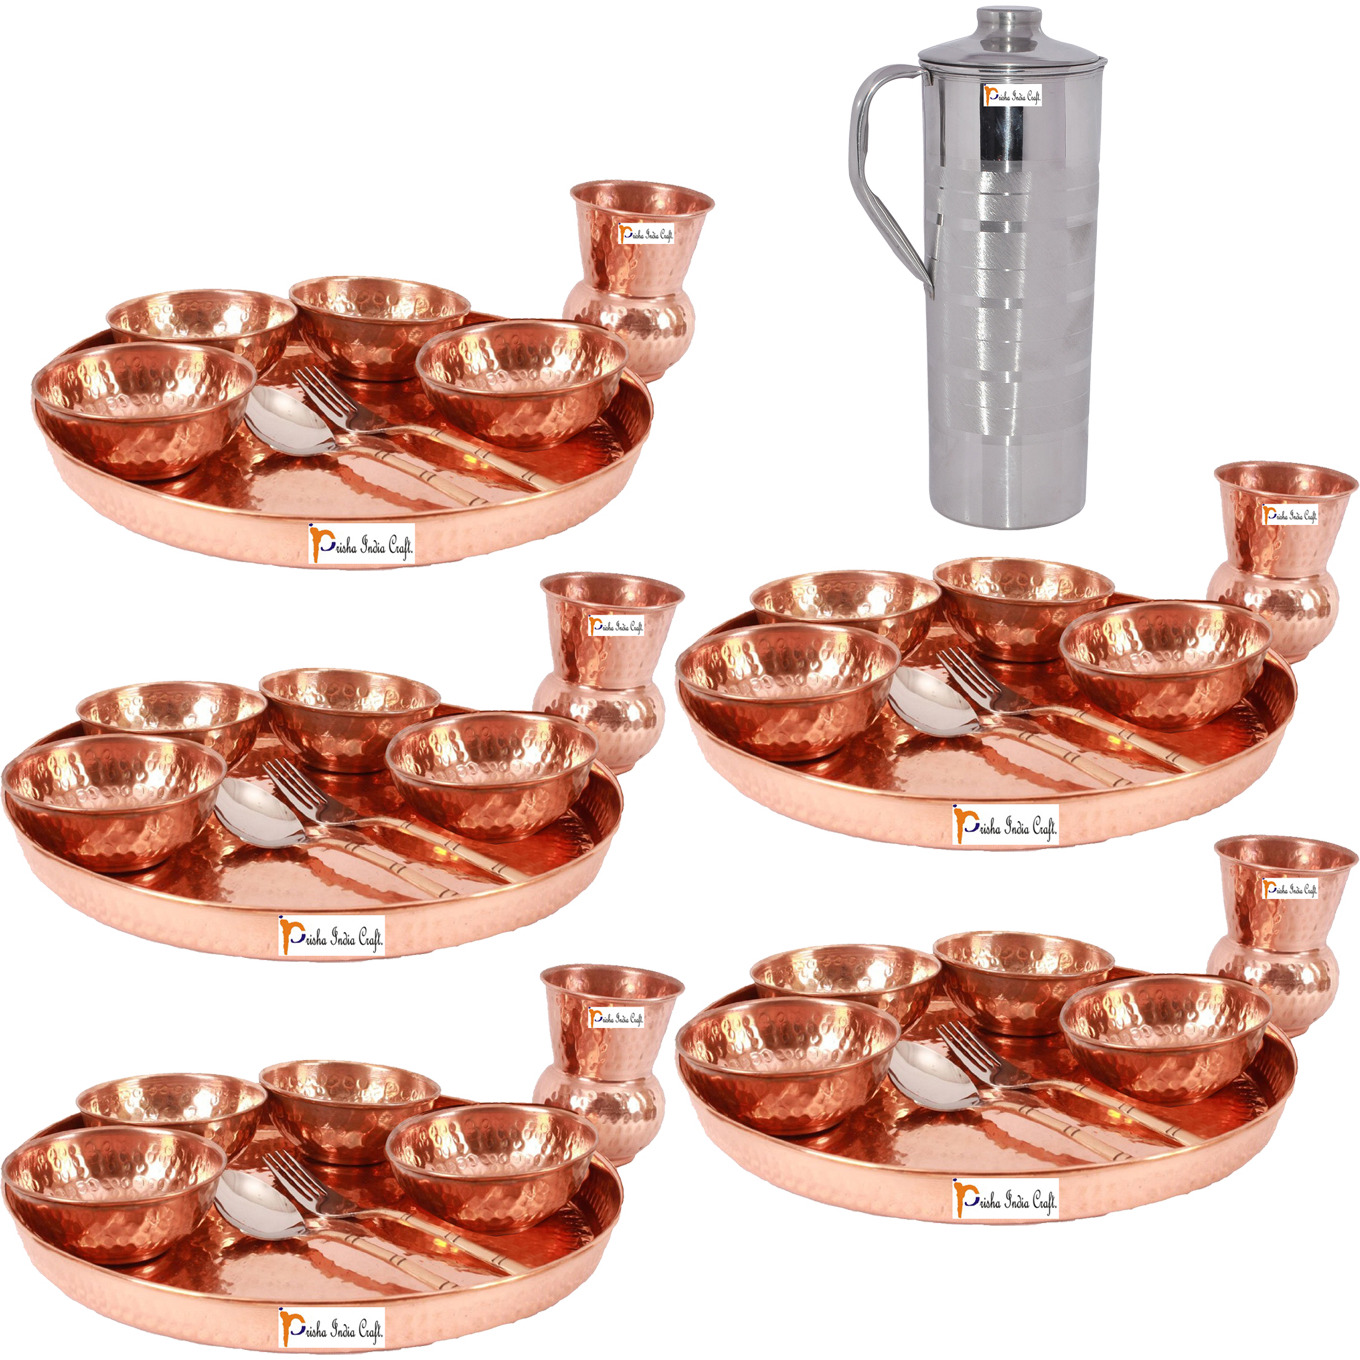 Prisha India Craft B. Set of 5 Dinnerware Traditional 100% Pure Copper Dinner Set of Thali Plate, Bowls, Glass and Spoon, Dia 12  With 1 Luxury Style Stainless Steel Copper Pitcher Jug - Christmas Gift